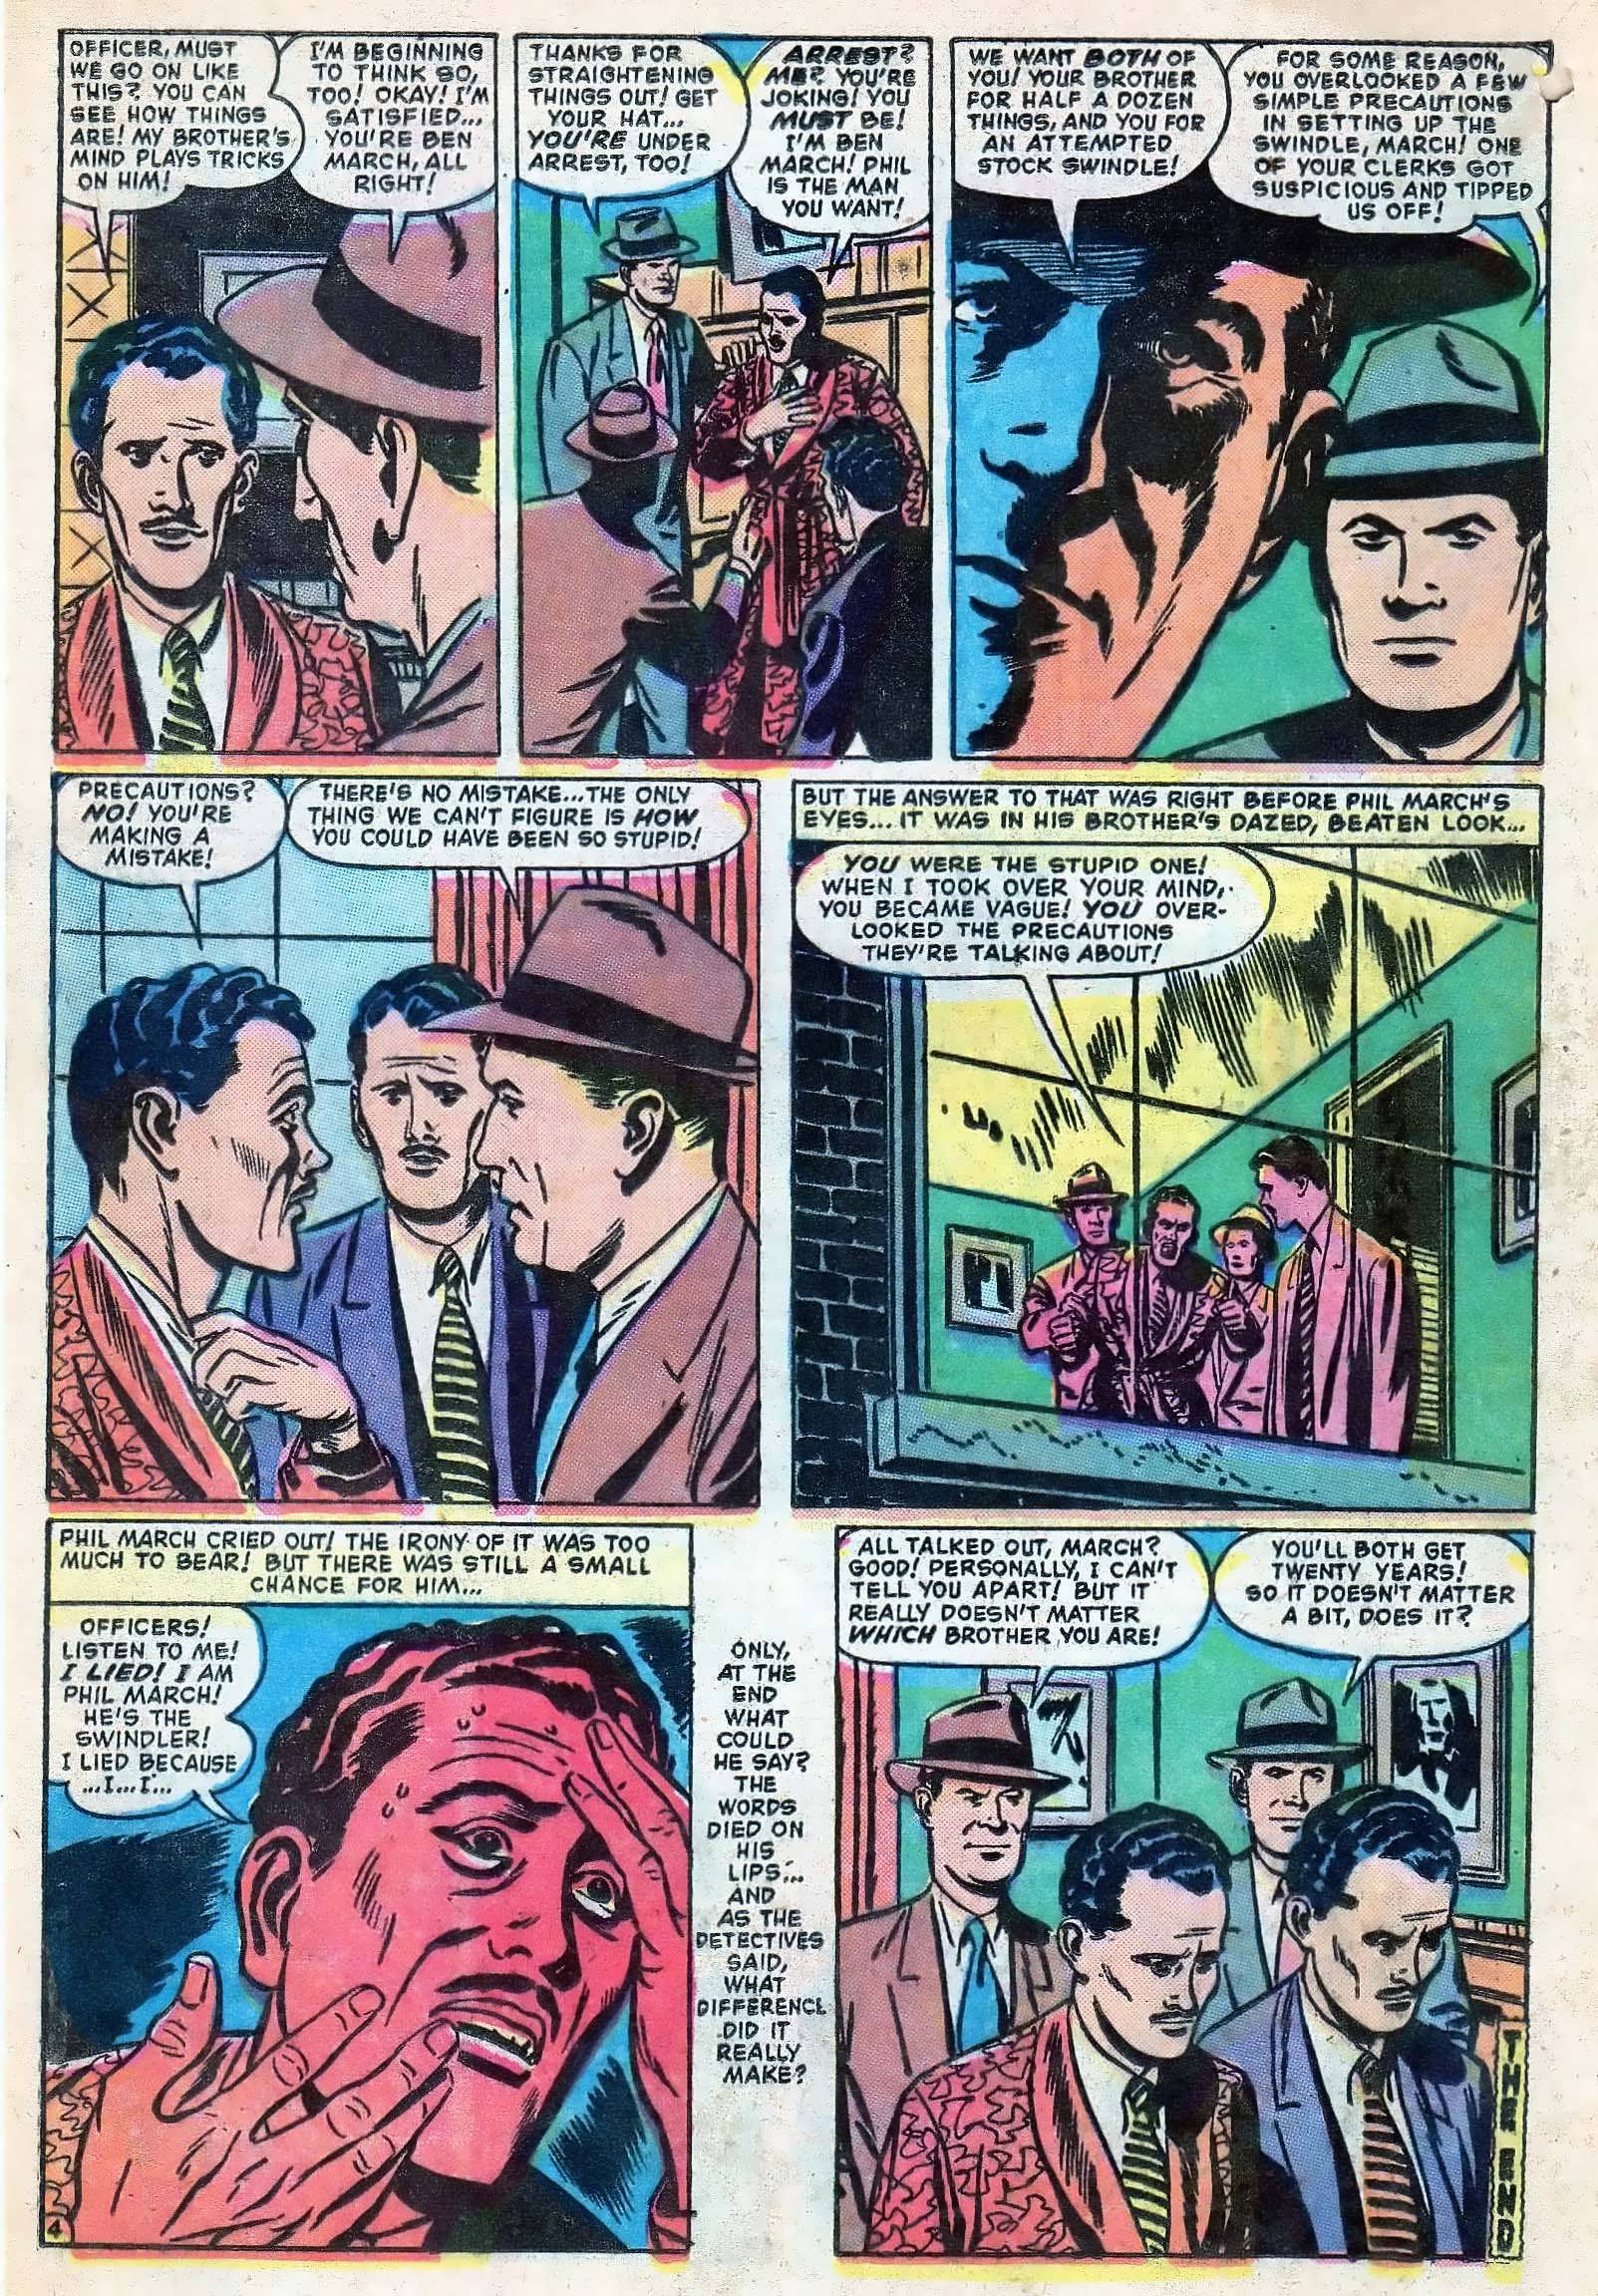 Marvel Tales (1949) 157 Page 15